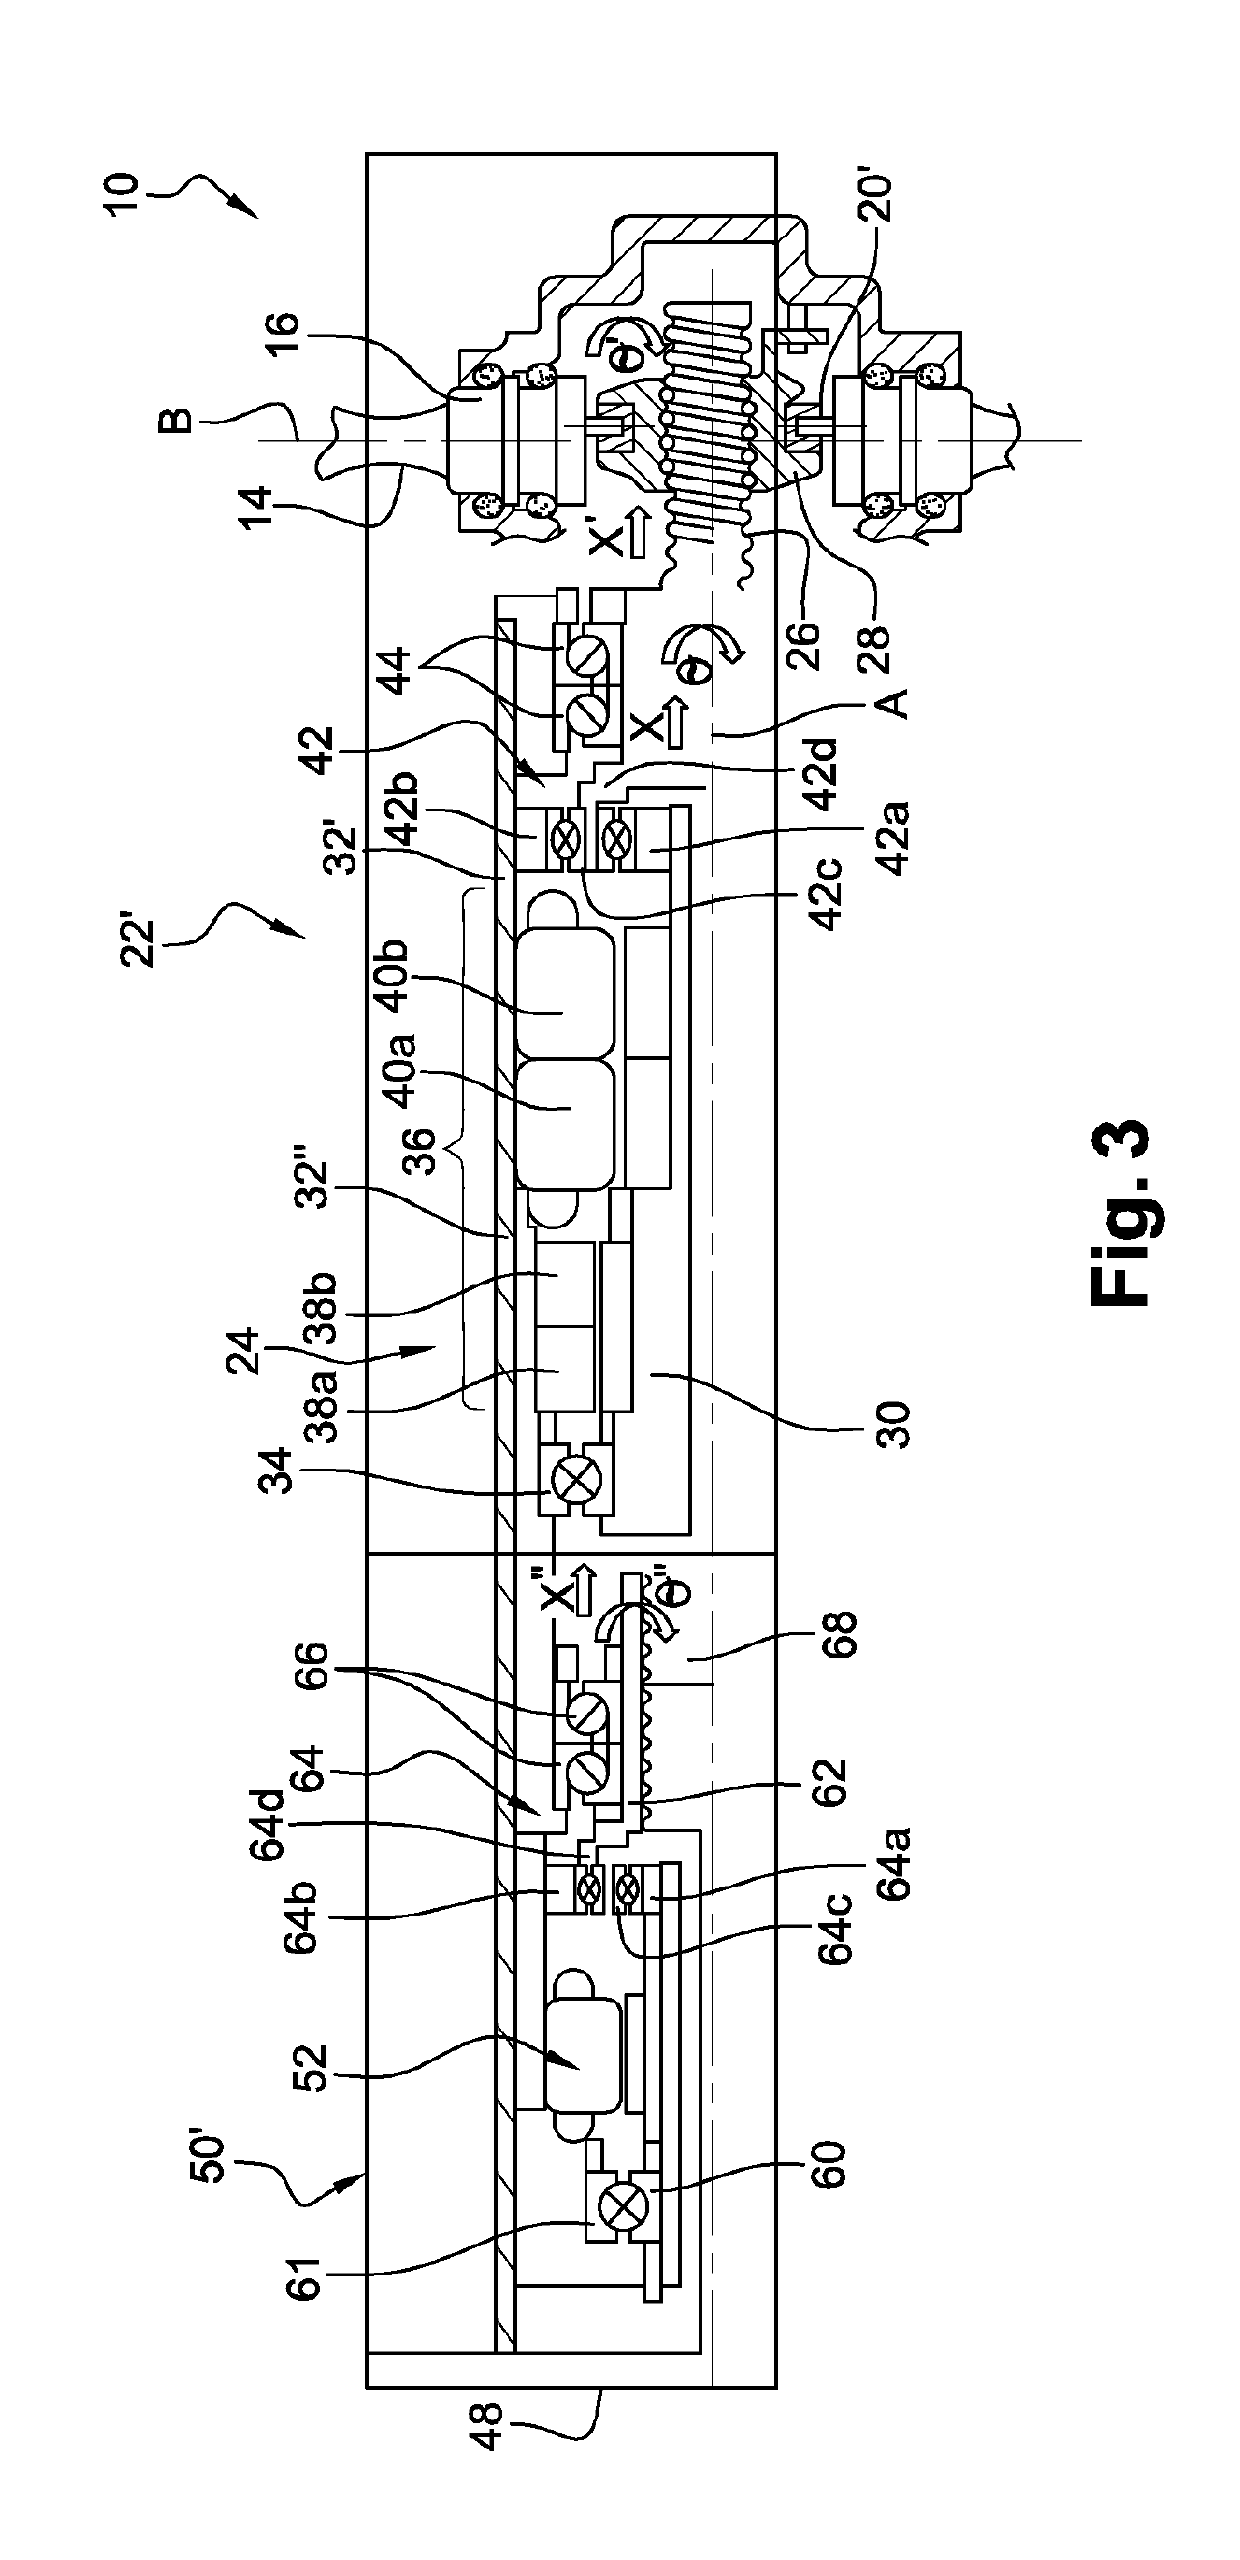 Simplified pitch actuation system for a turbomachine propeller